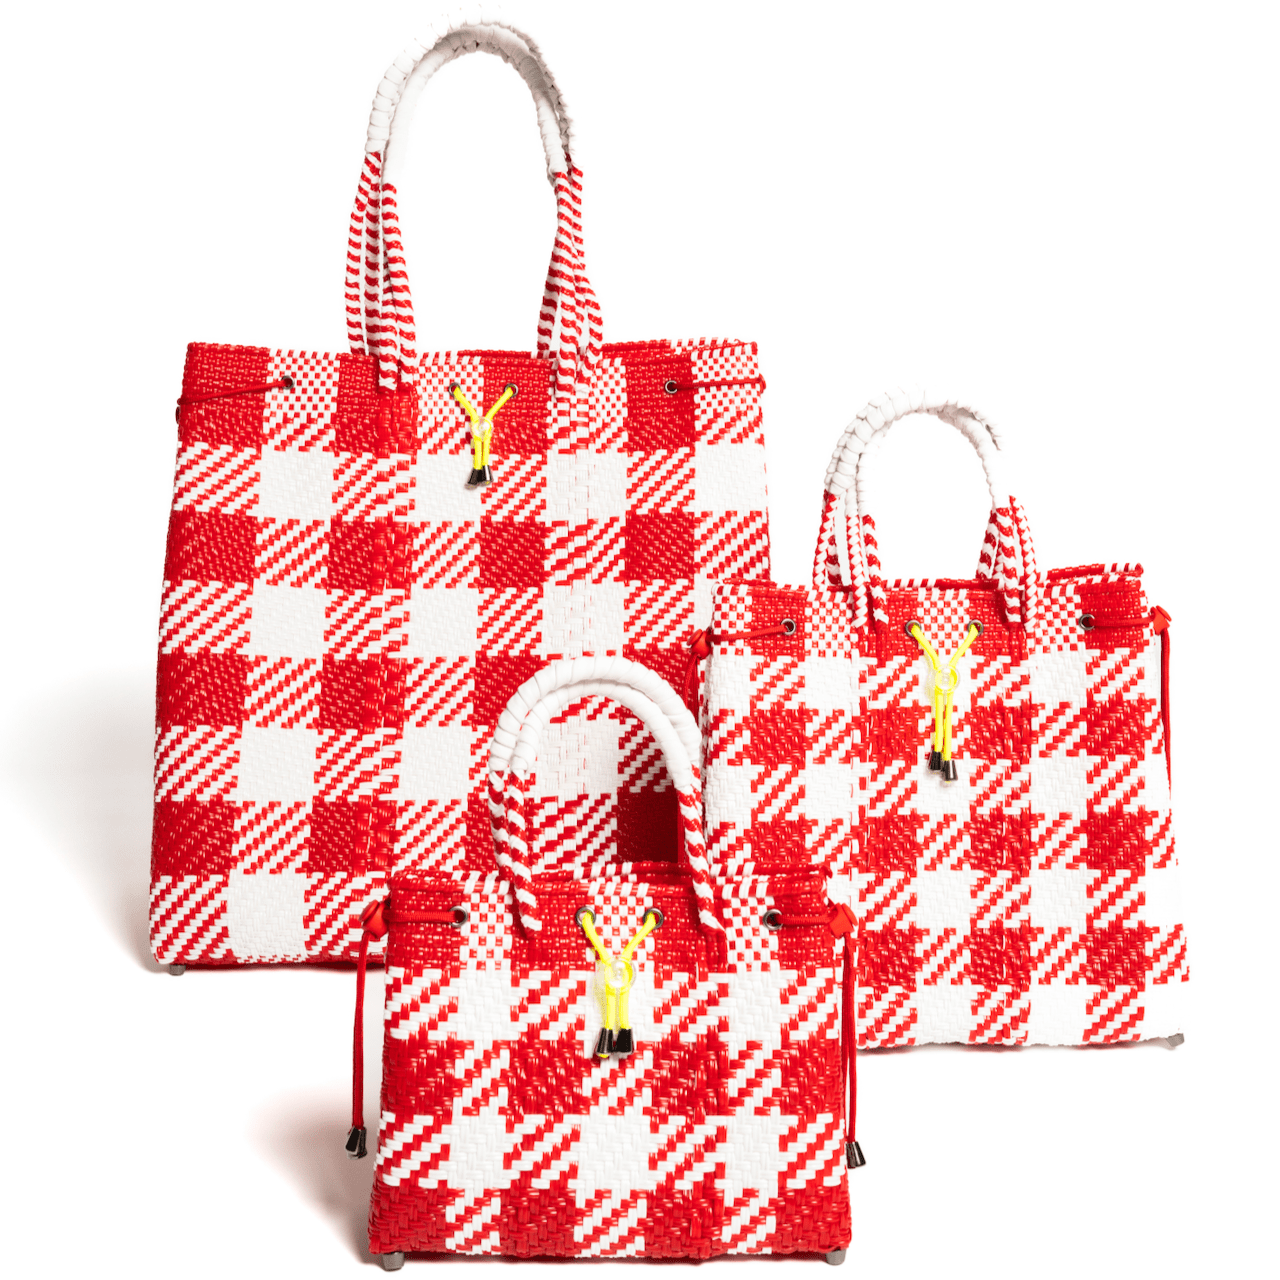 The All The Things Bags + Wallets Carryall / Picnic | Rojo The Carryfun Bag in Picnic | Rojo